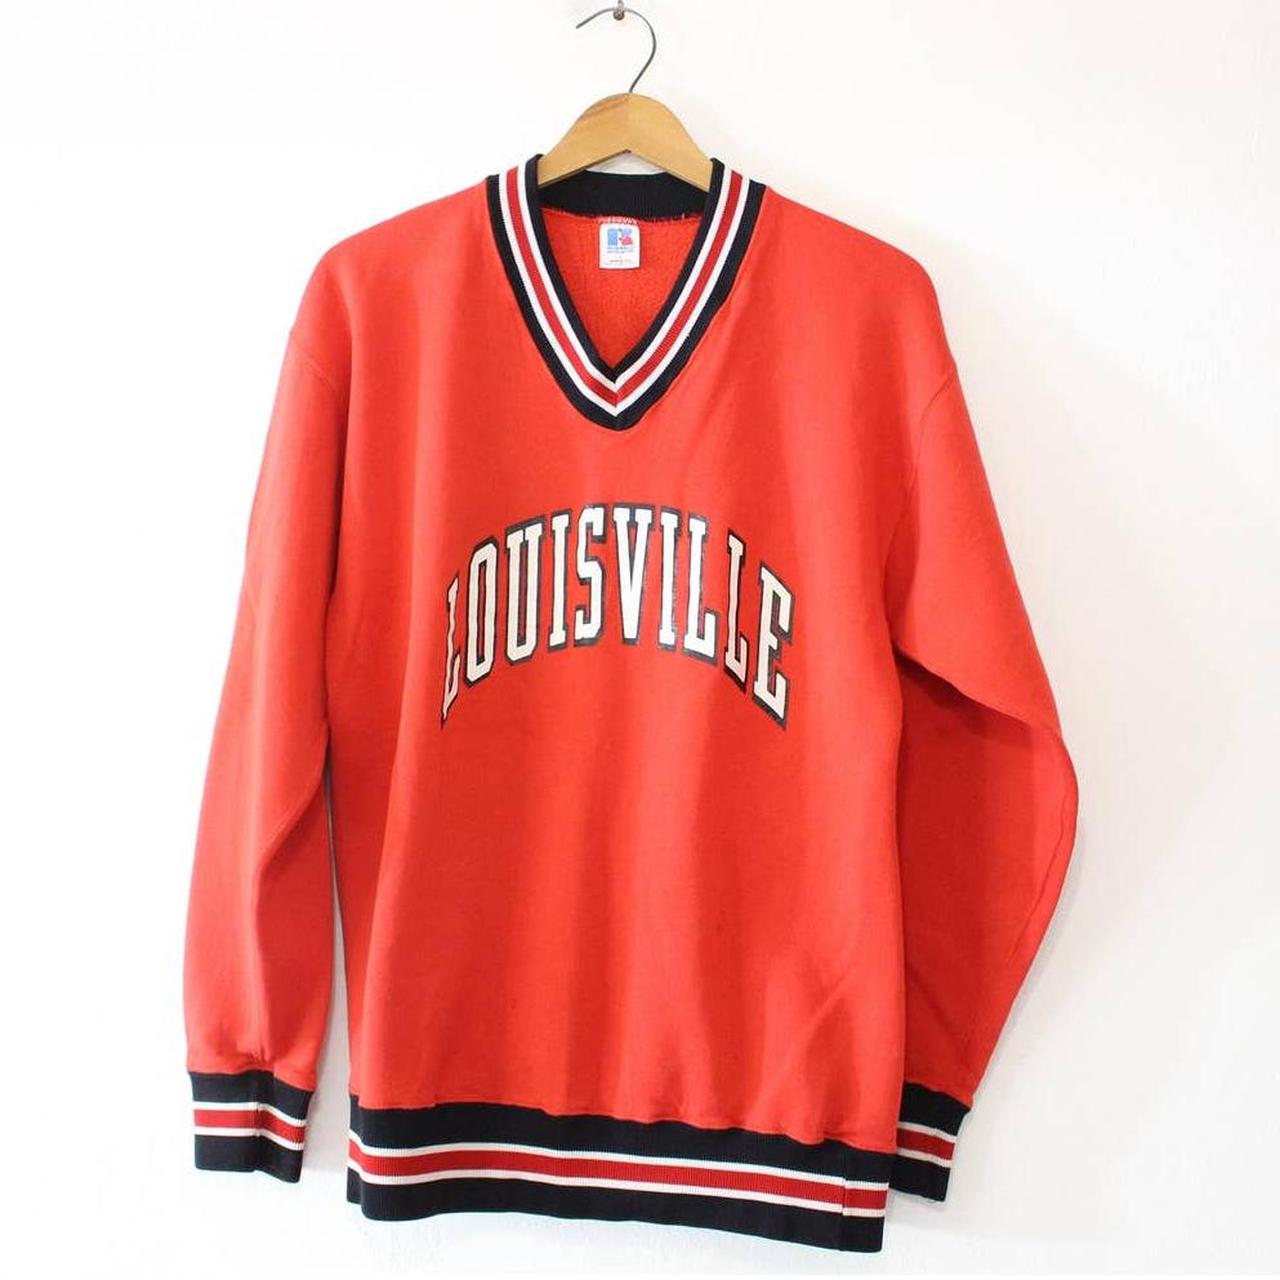 University of Louisville Hoodie!, Condition: Refer to